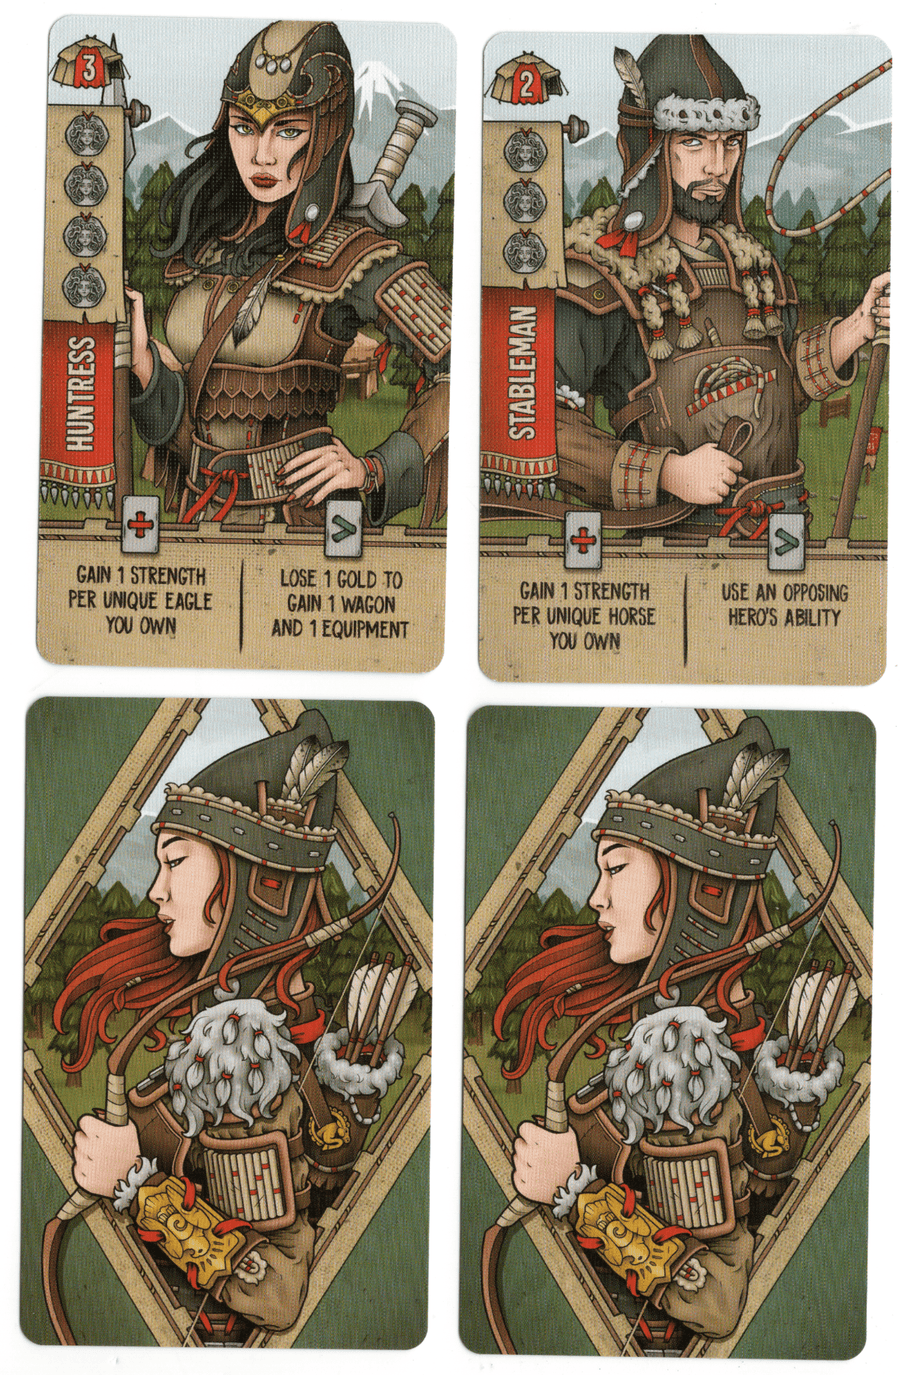 A composite image of two promo cards for the board game Raiders of Scythia, featuring an identical image of a woman archer on the back of the card, a unique illustration of an huntress and stableman on the front of each card, and text that describes the card's ability in the game at the bottom.